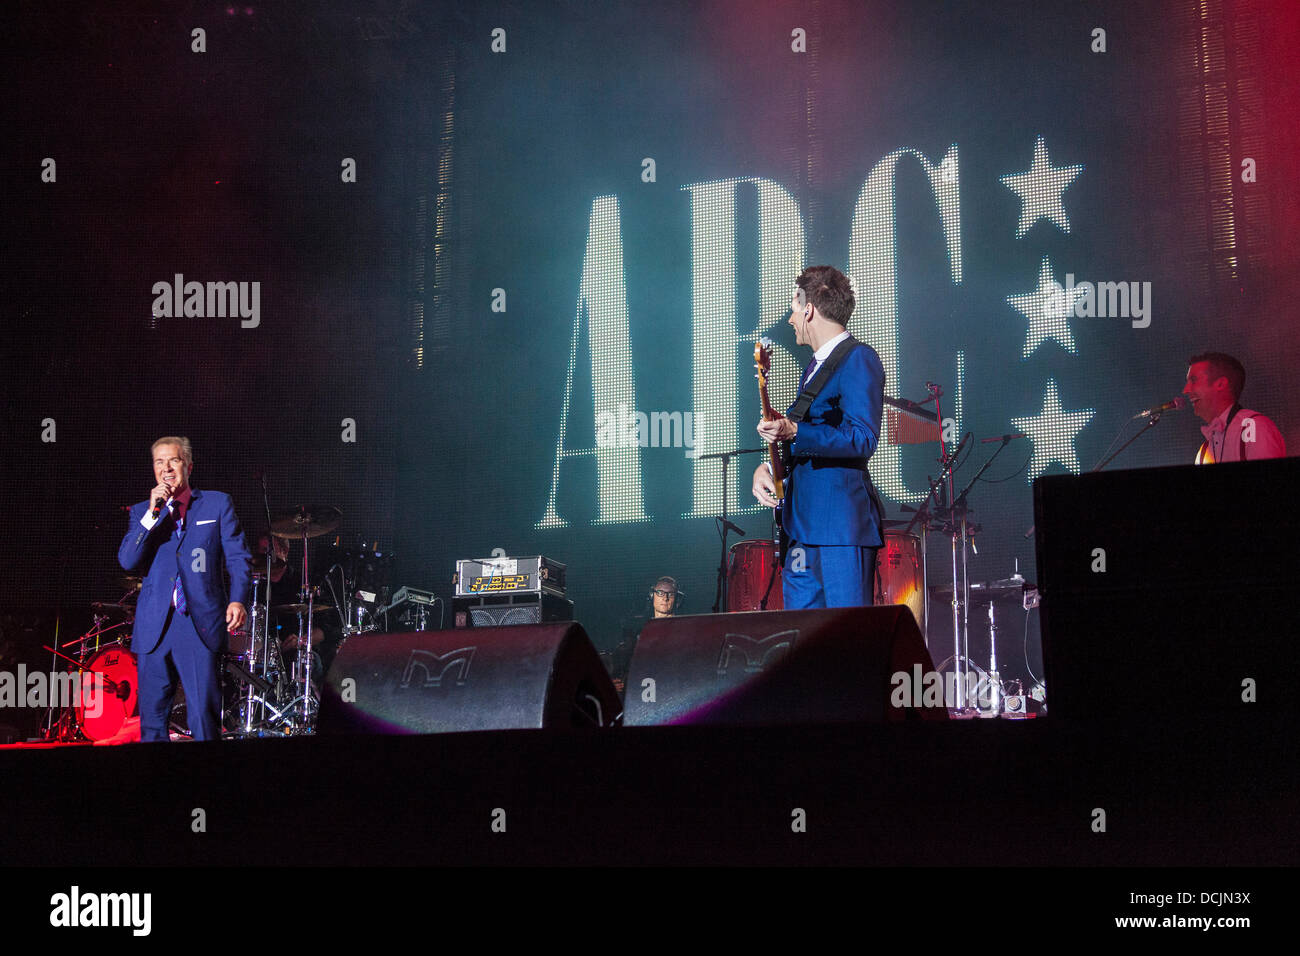 Remenham, Henley-on-Thames, Oxfordshire, UK. 18 August 2013. Lead singer MARTIN FRY (left) of the English new-wave band ABC performs on-stage at the 2013 'REWIND - The 80s Festival' held 16-17-18 August 2013. Photograph © 2013 John Henshall/Alamy Live News. PER0378 Stock Photo